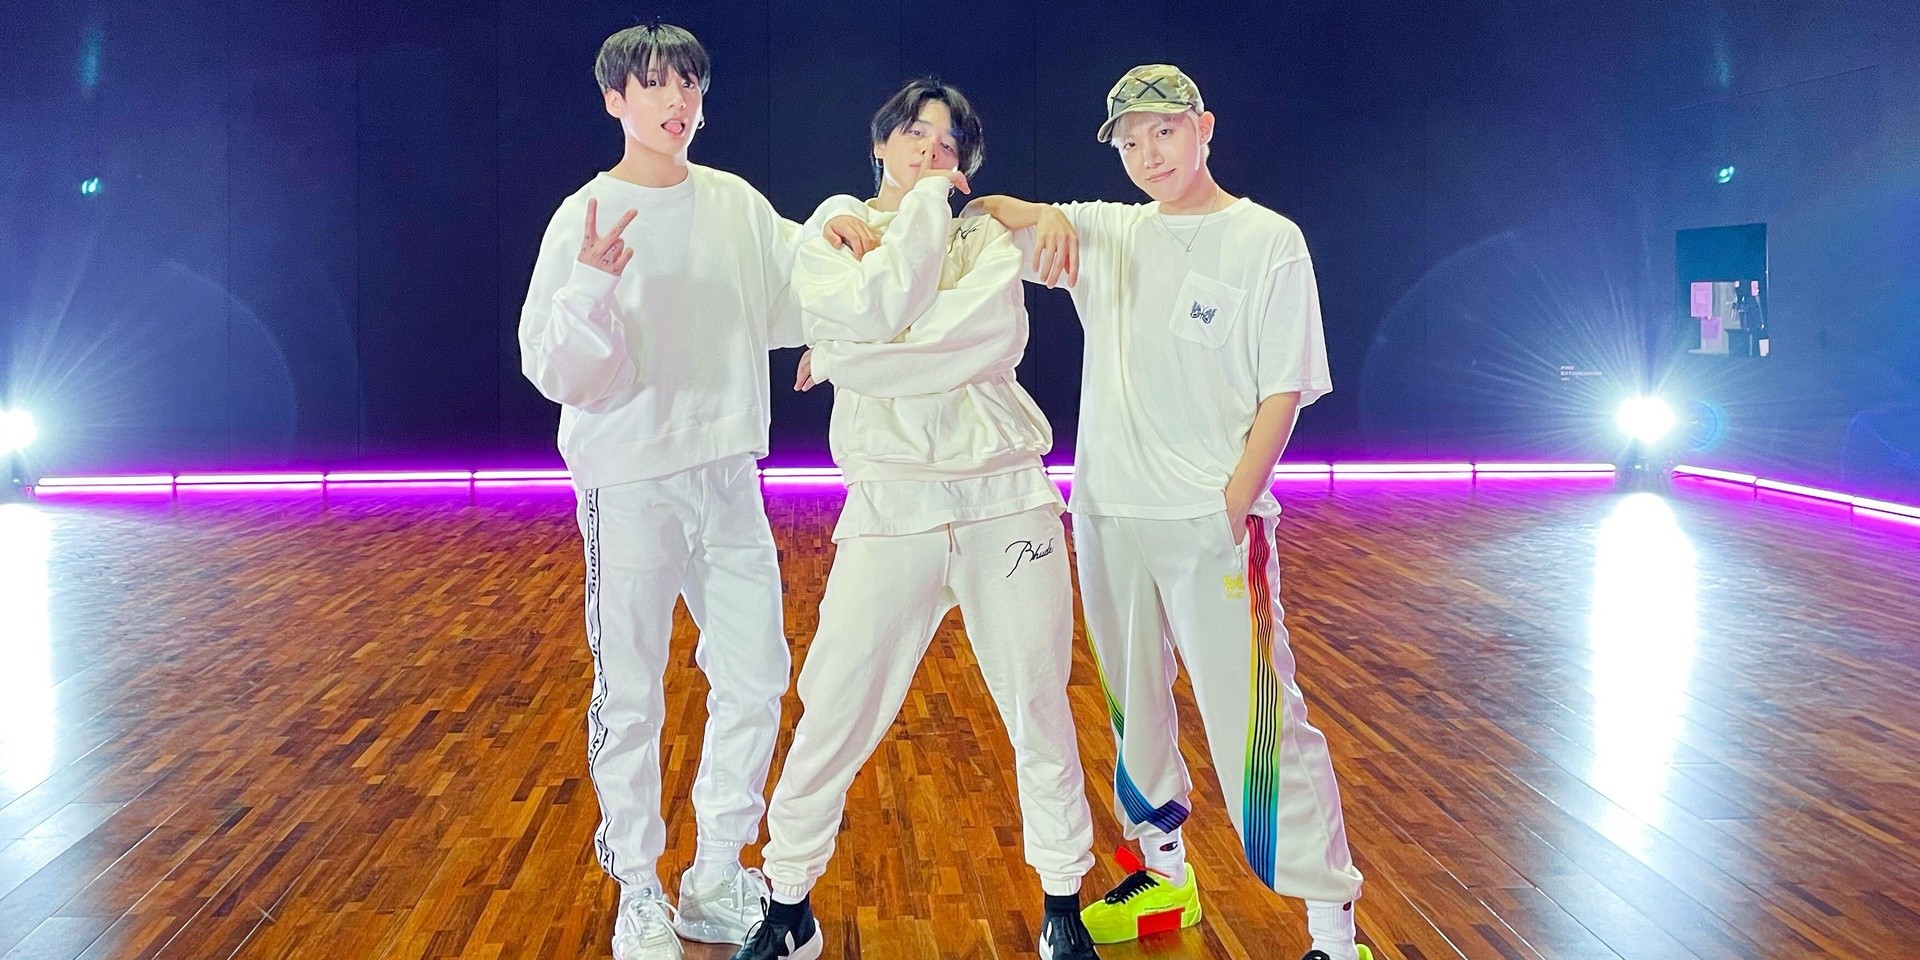 BTS' Jungkook, Jimin, and J-hope drop special performance video featuring 'Butter' Megan Thee Stallion remix – watch